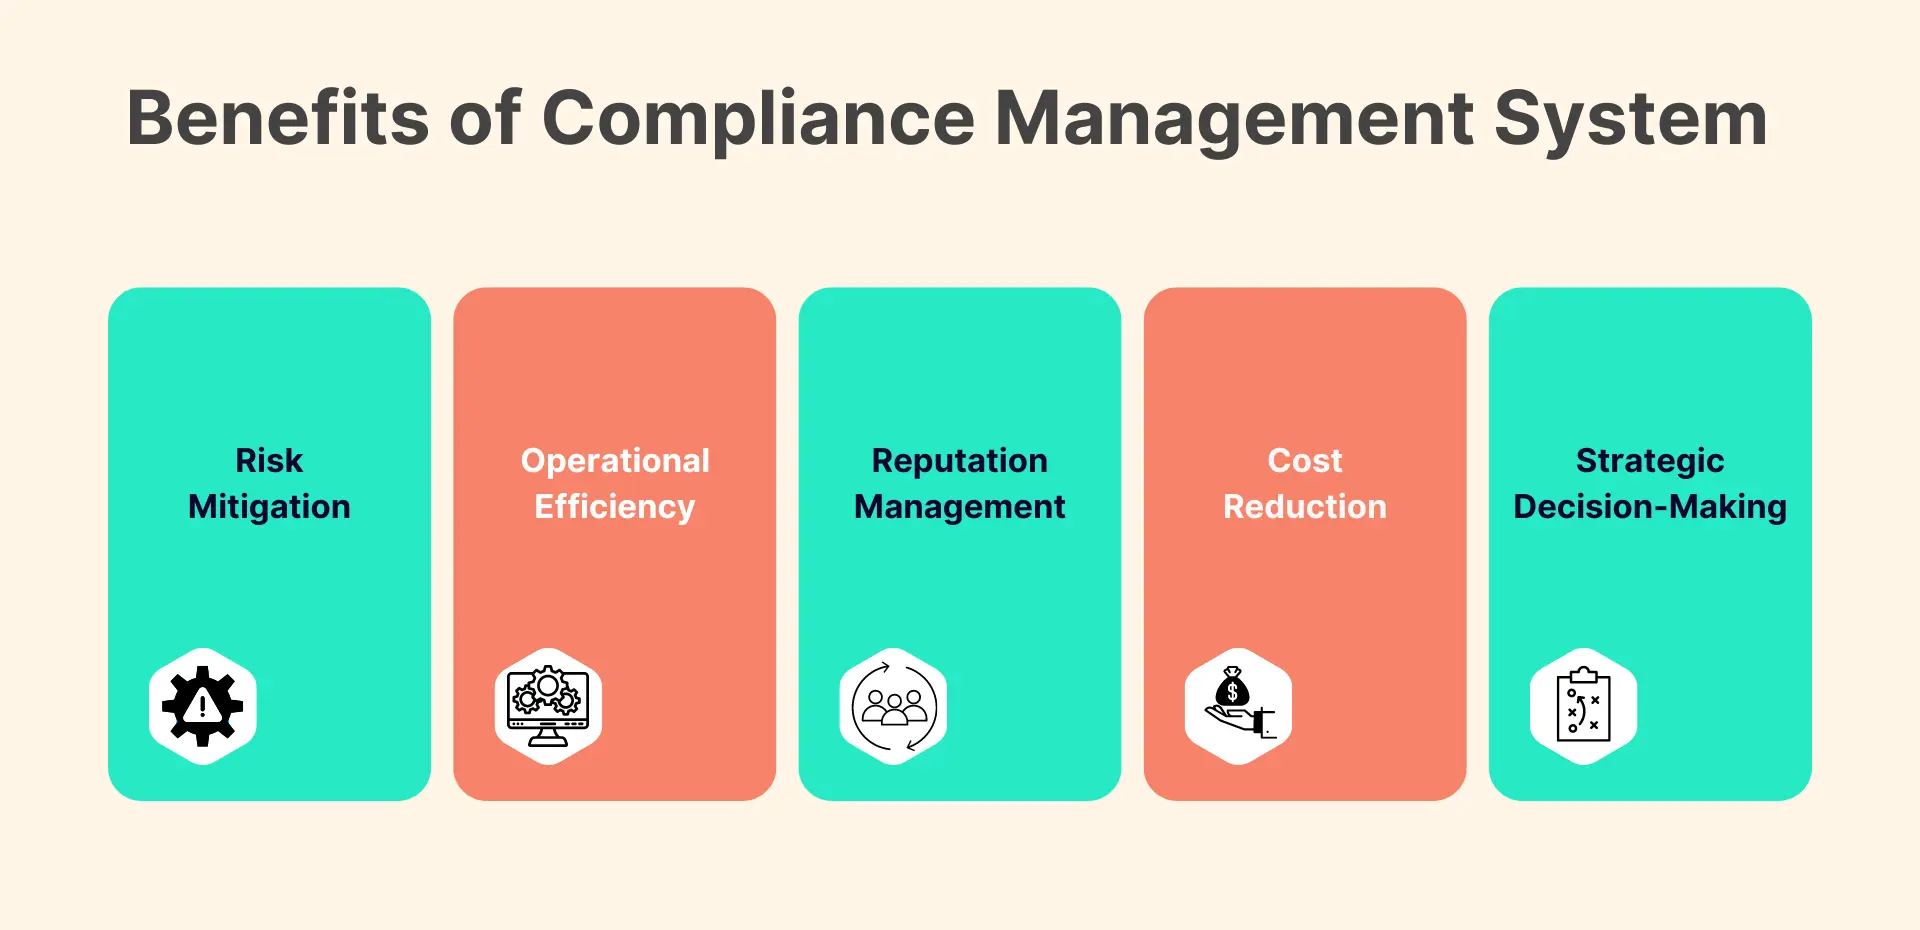 Compliance Management Systems Benefit